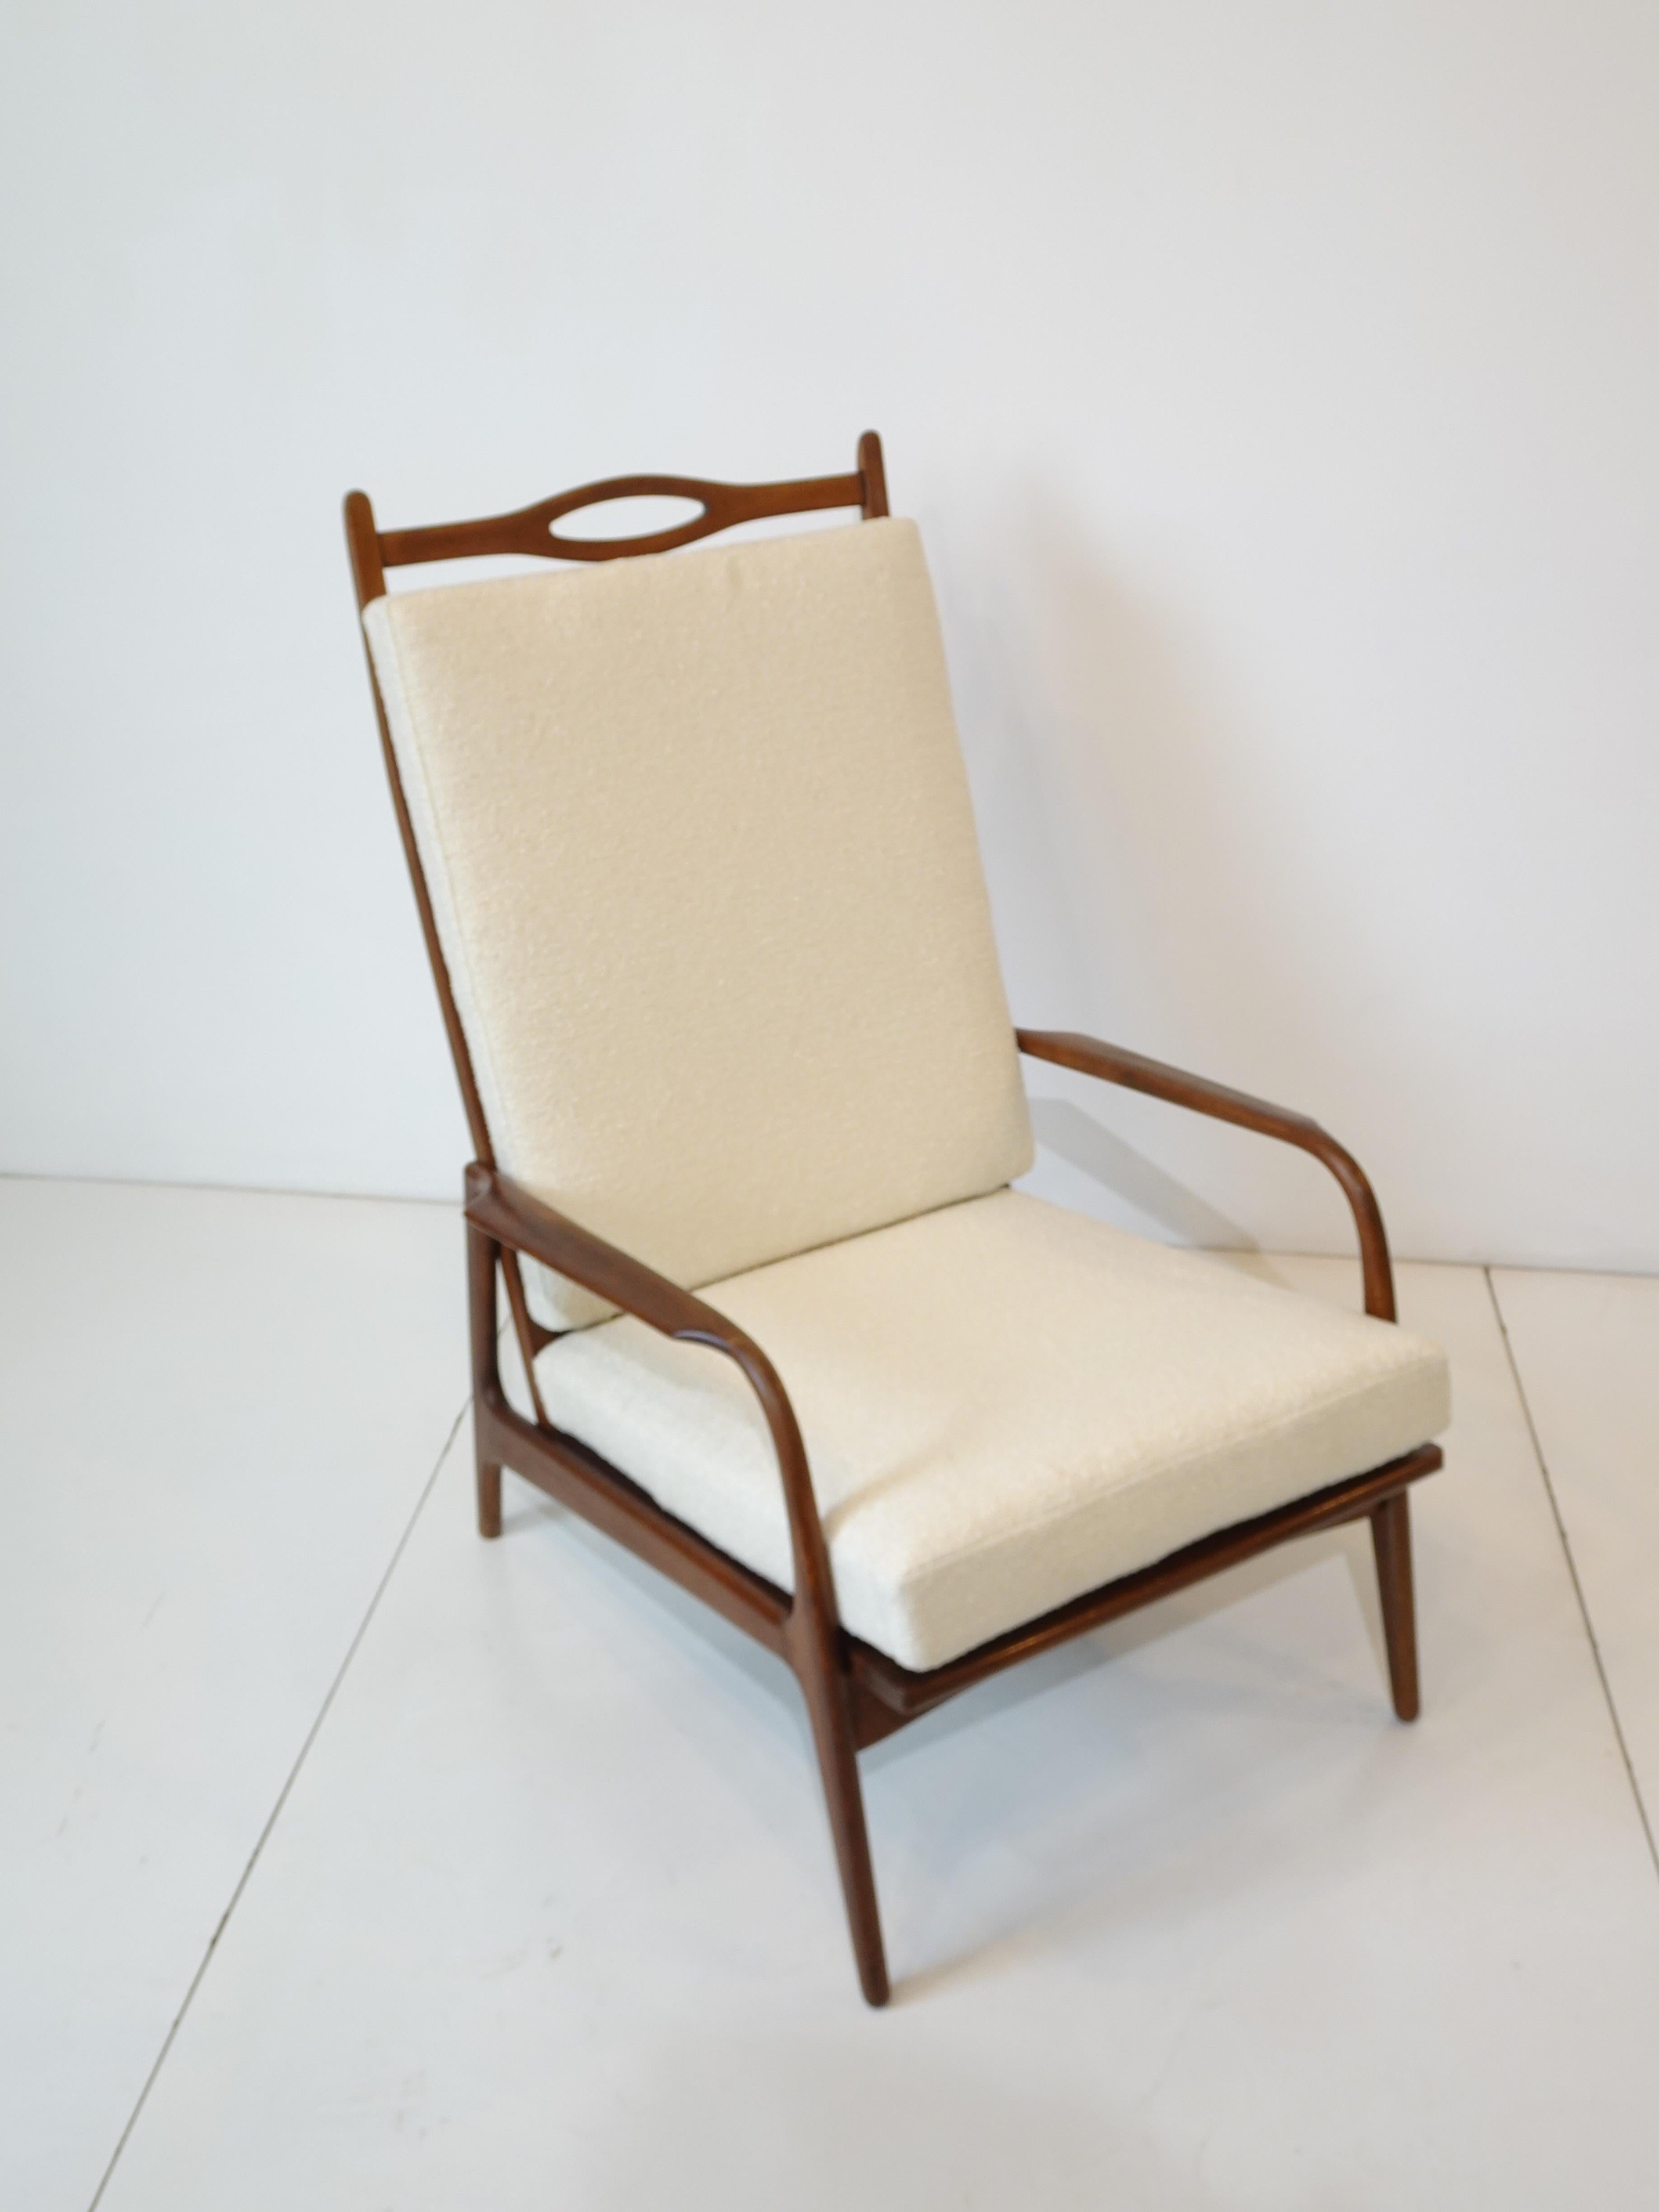 A wonderful mid century walnut framed lounge chair with nicely designed slim arms and sculptural back having two loose cushions covered in cream tone Boucle fabric . A piece of furniture that's art and is super comfortable and makes a statement just